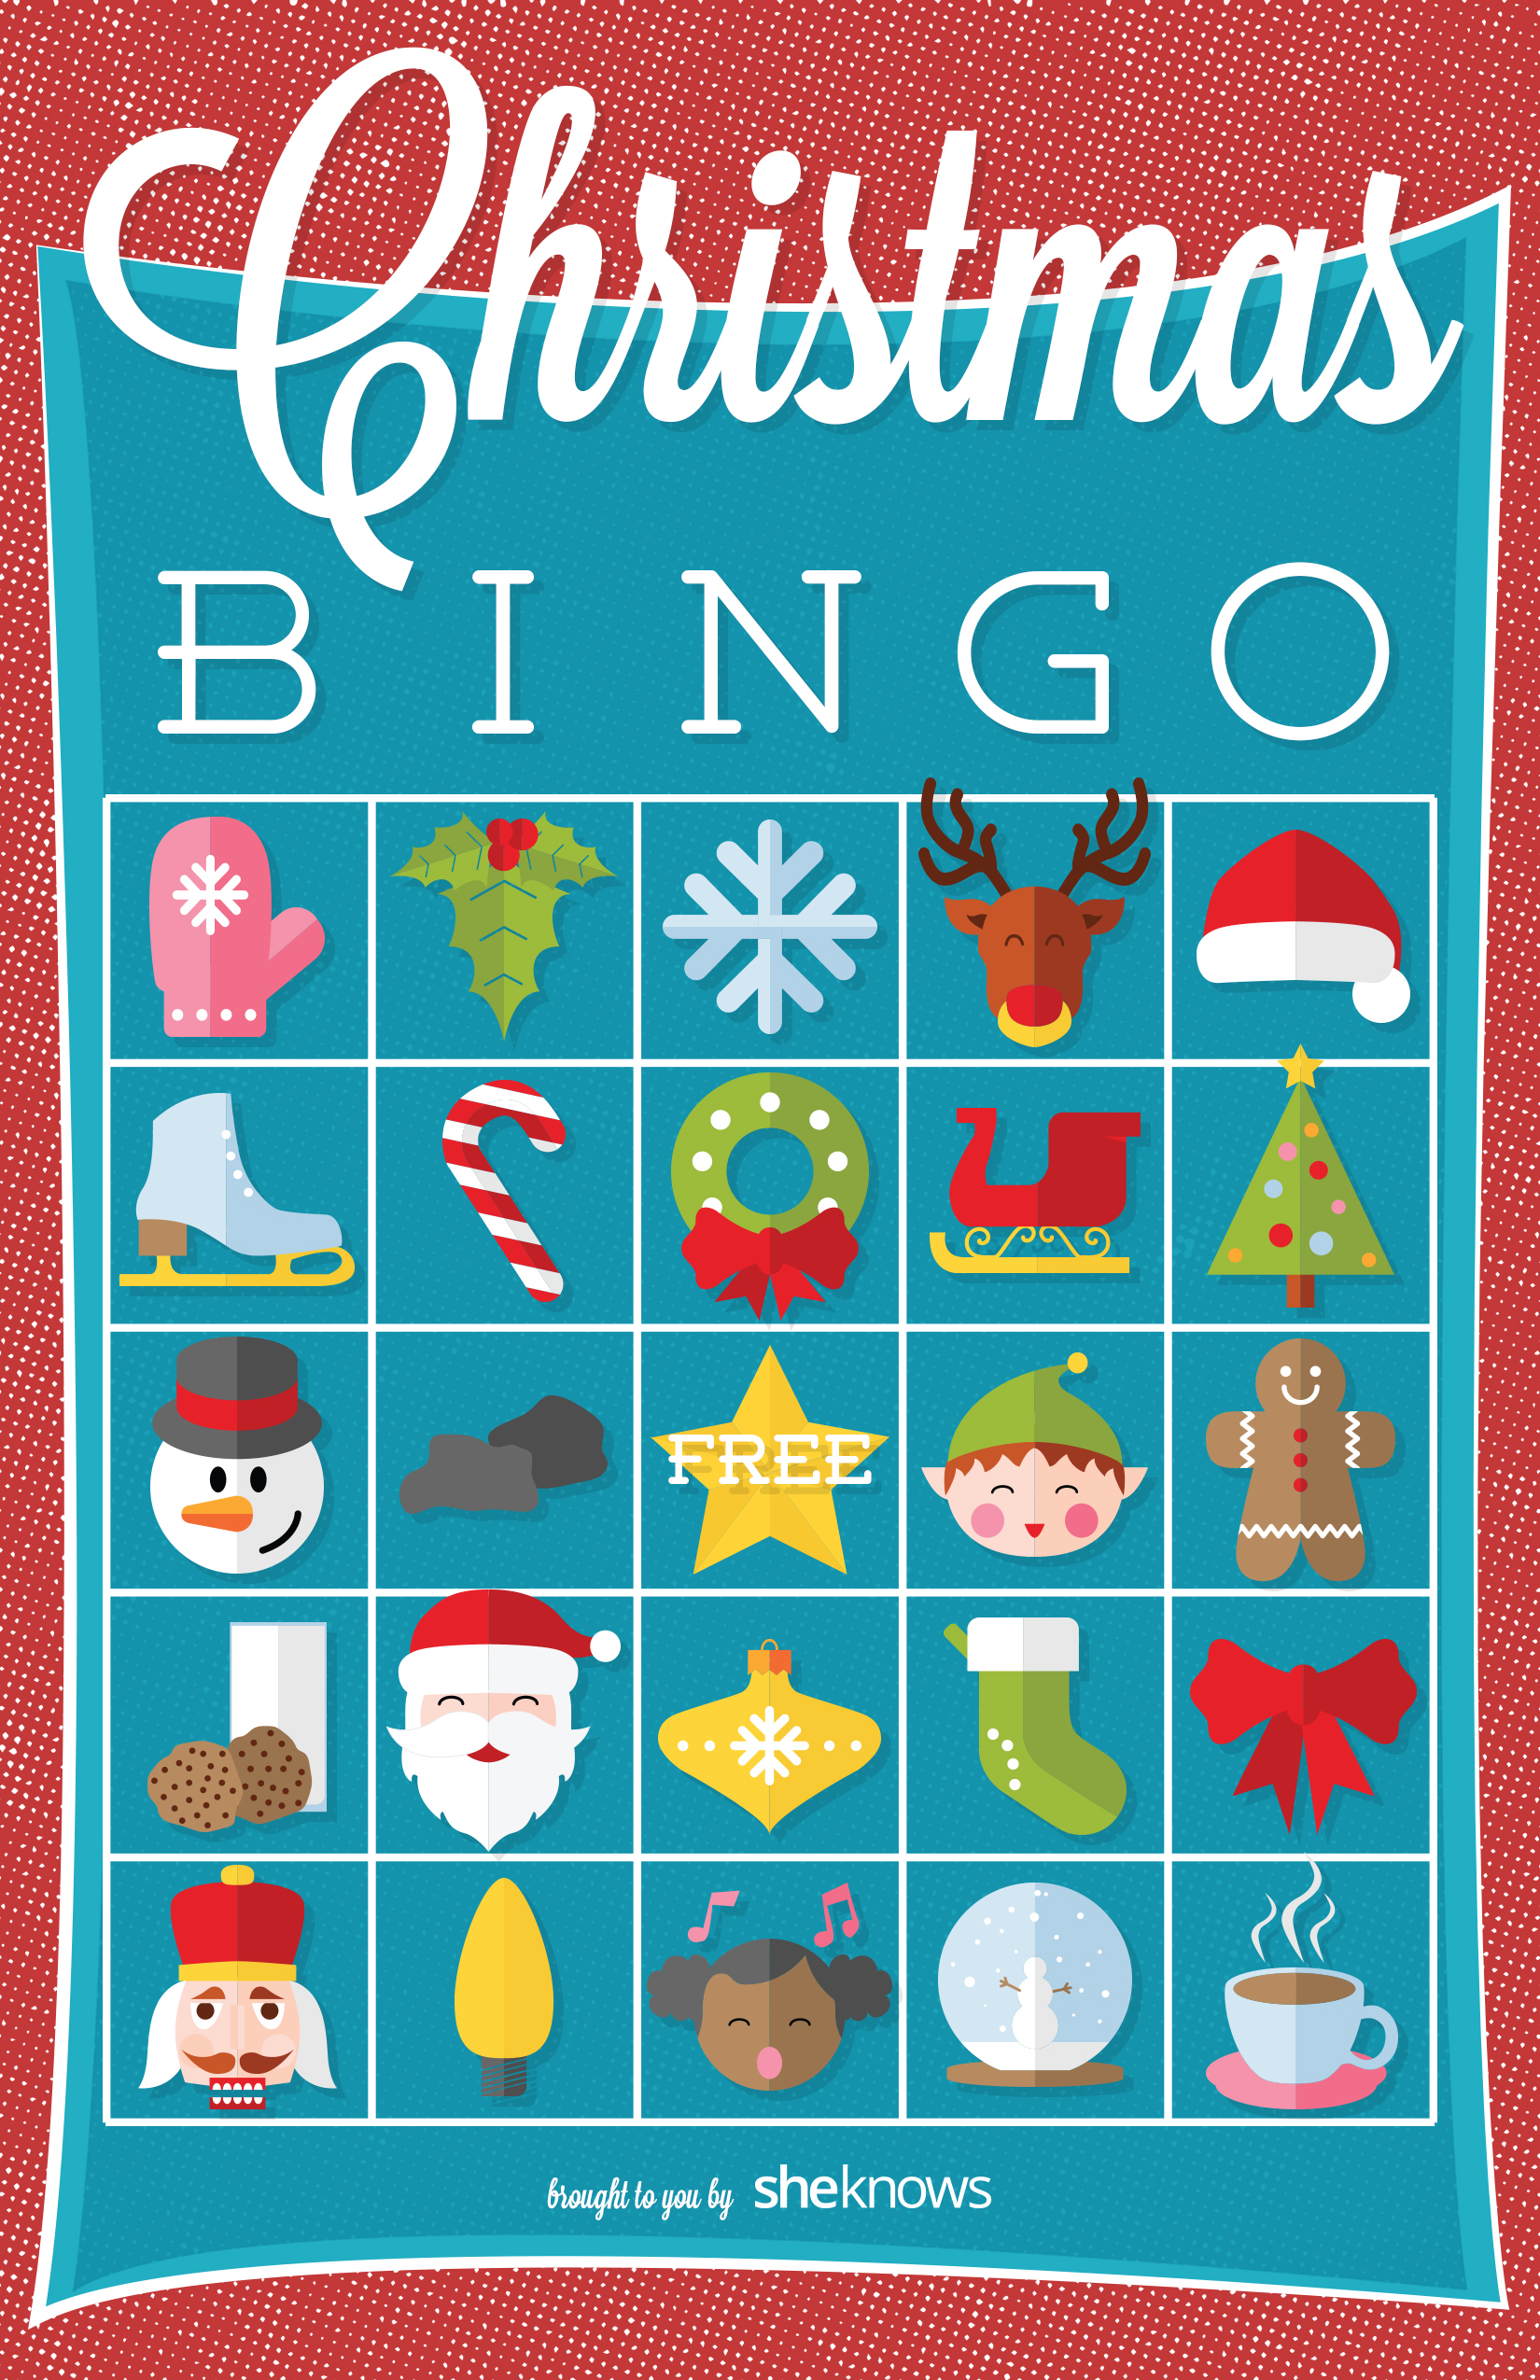 Christmas bingo game printable with three twists on the classic rules